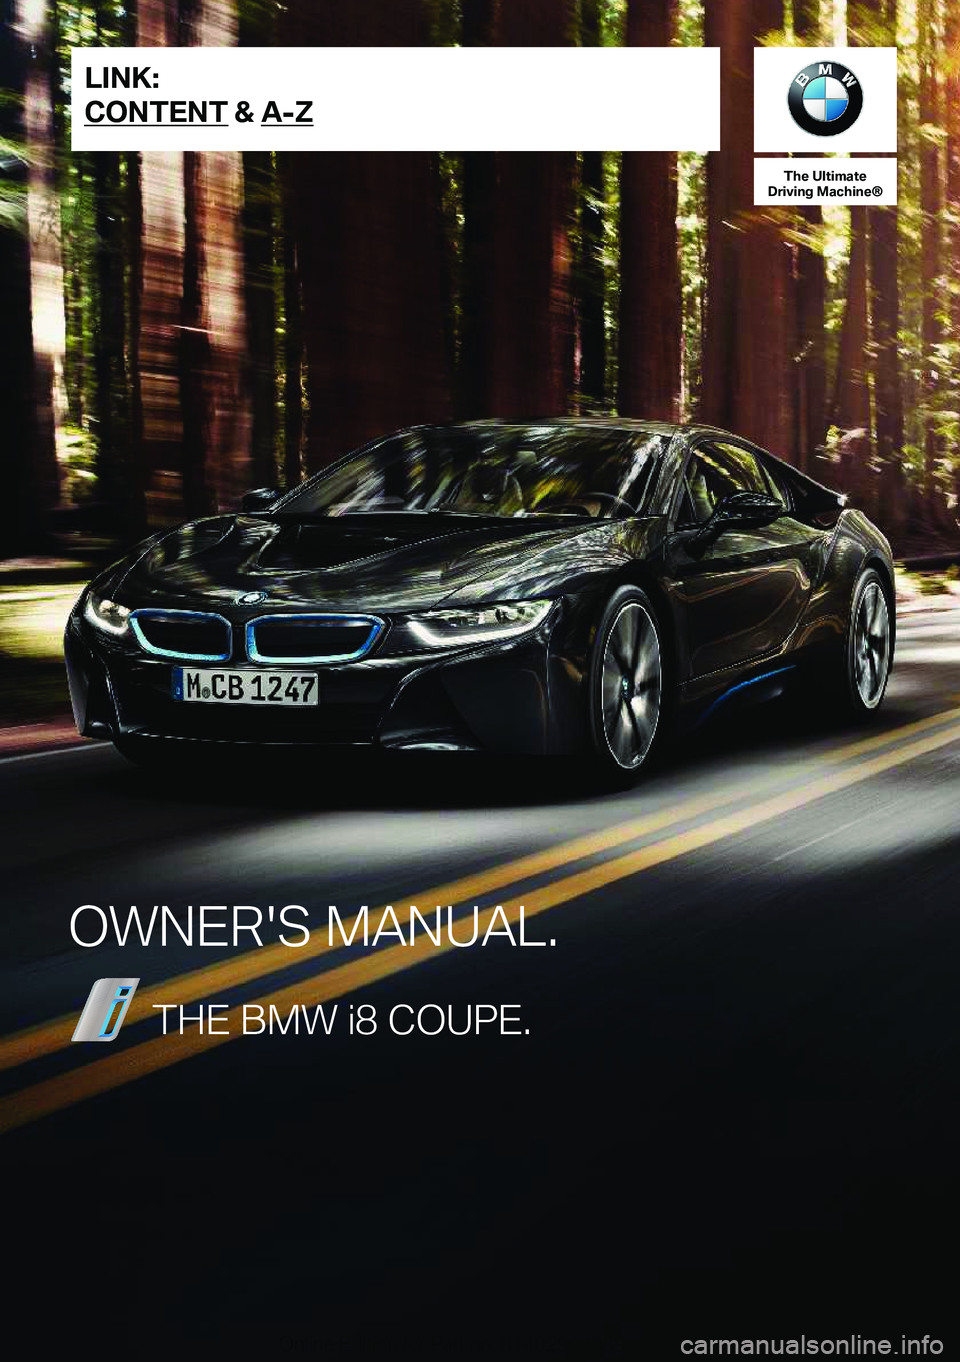 BMW I8 2020  Owners Manual �T�h�e��U�l�U�i�m�B�U�e
�D�S�i�W�i�n�g��M�B�c�h�i�n�e�n
�O�W�N�E�R�'�S��M�A�N�U�A�L�.�T�H�E��B�M�W��i�8��C�O�U�P�E�.�L�I�N�K�:
�C�O�N�T�E�N�T����A��;�O�n�l�i�n�e��E�d�i�t�i�o�n��f�o�r�